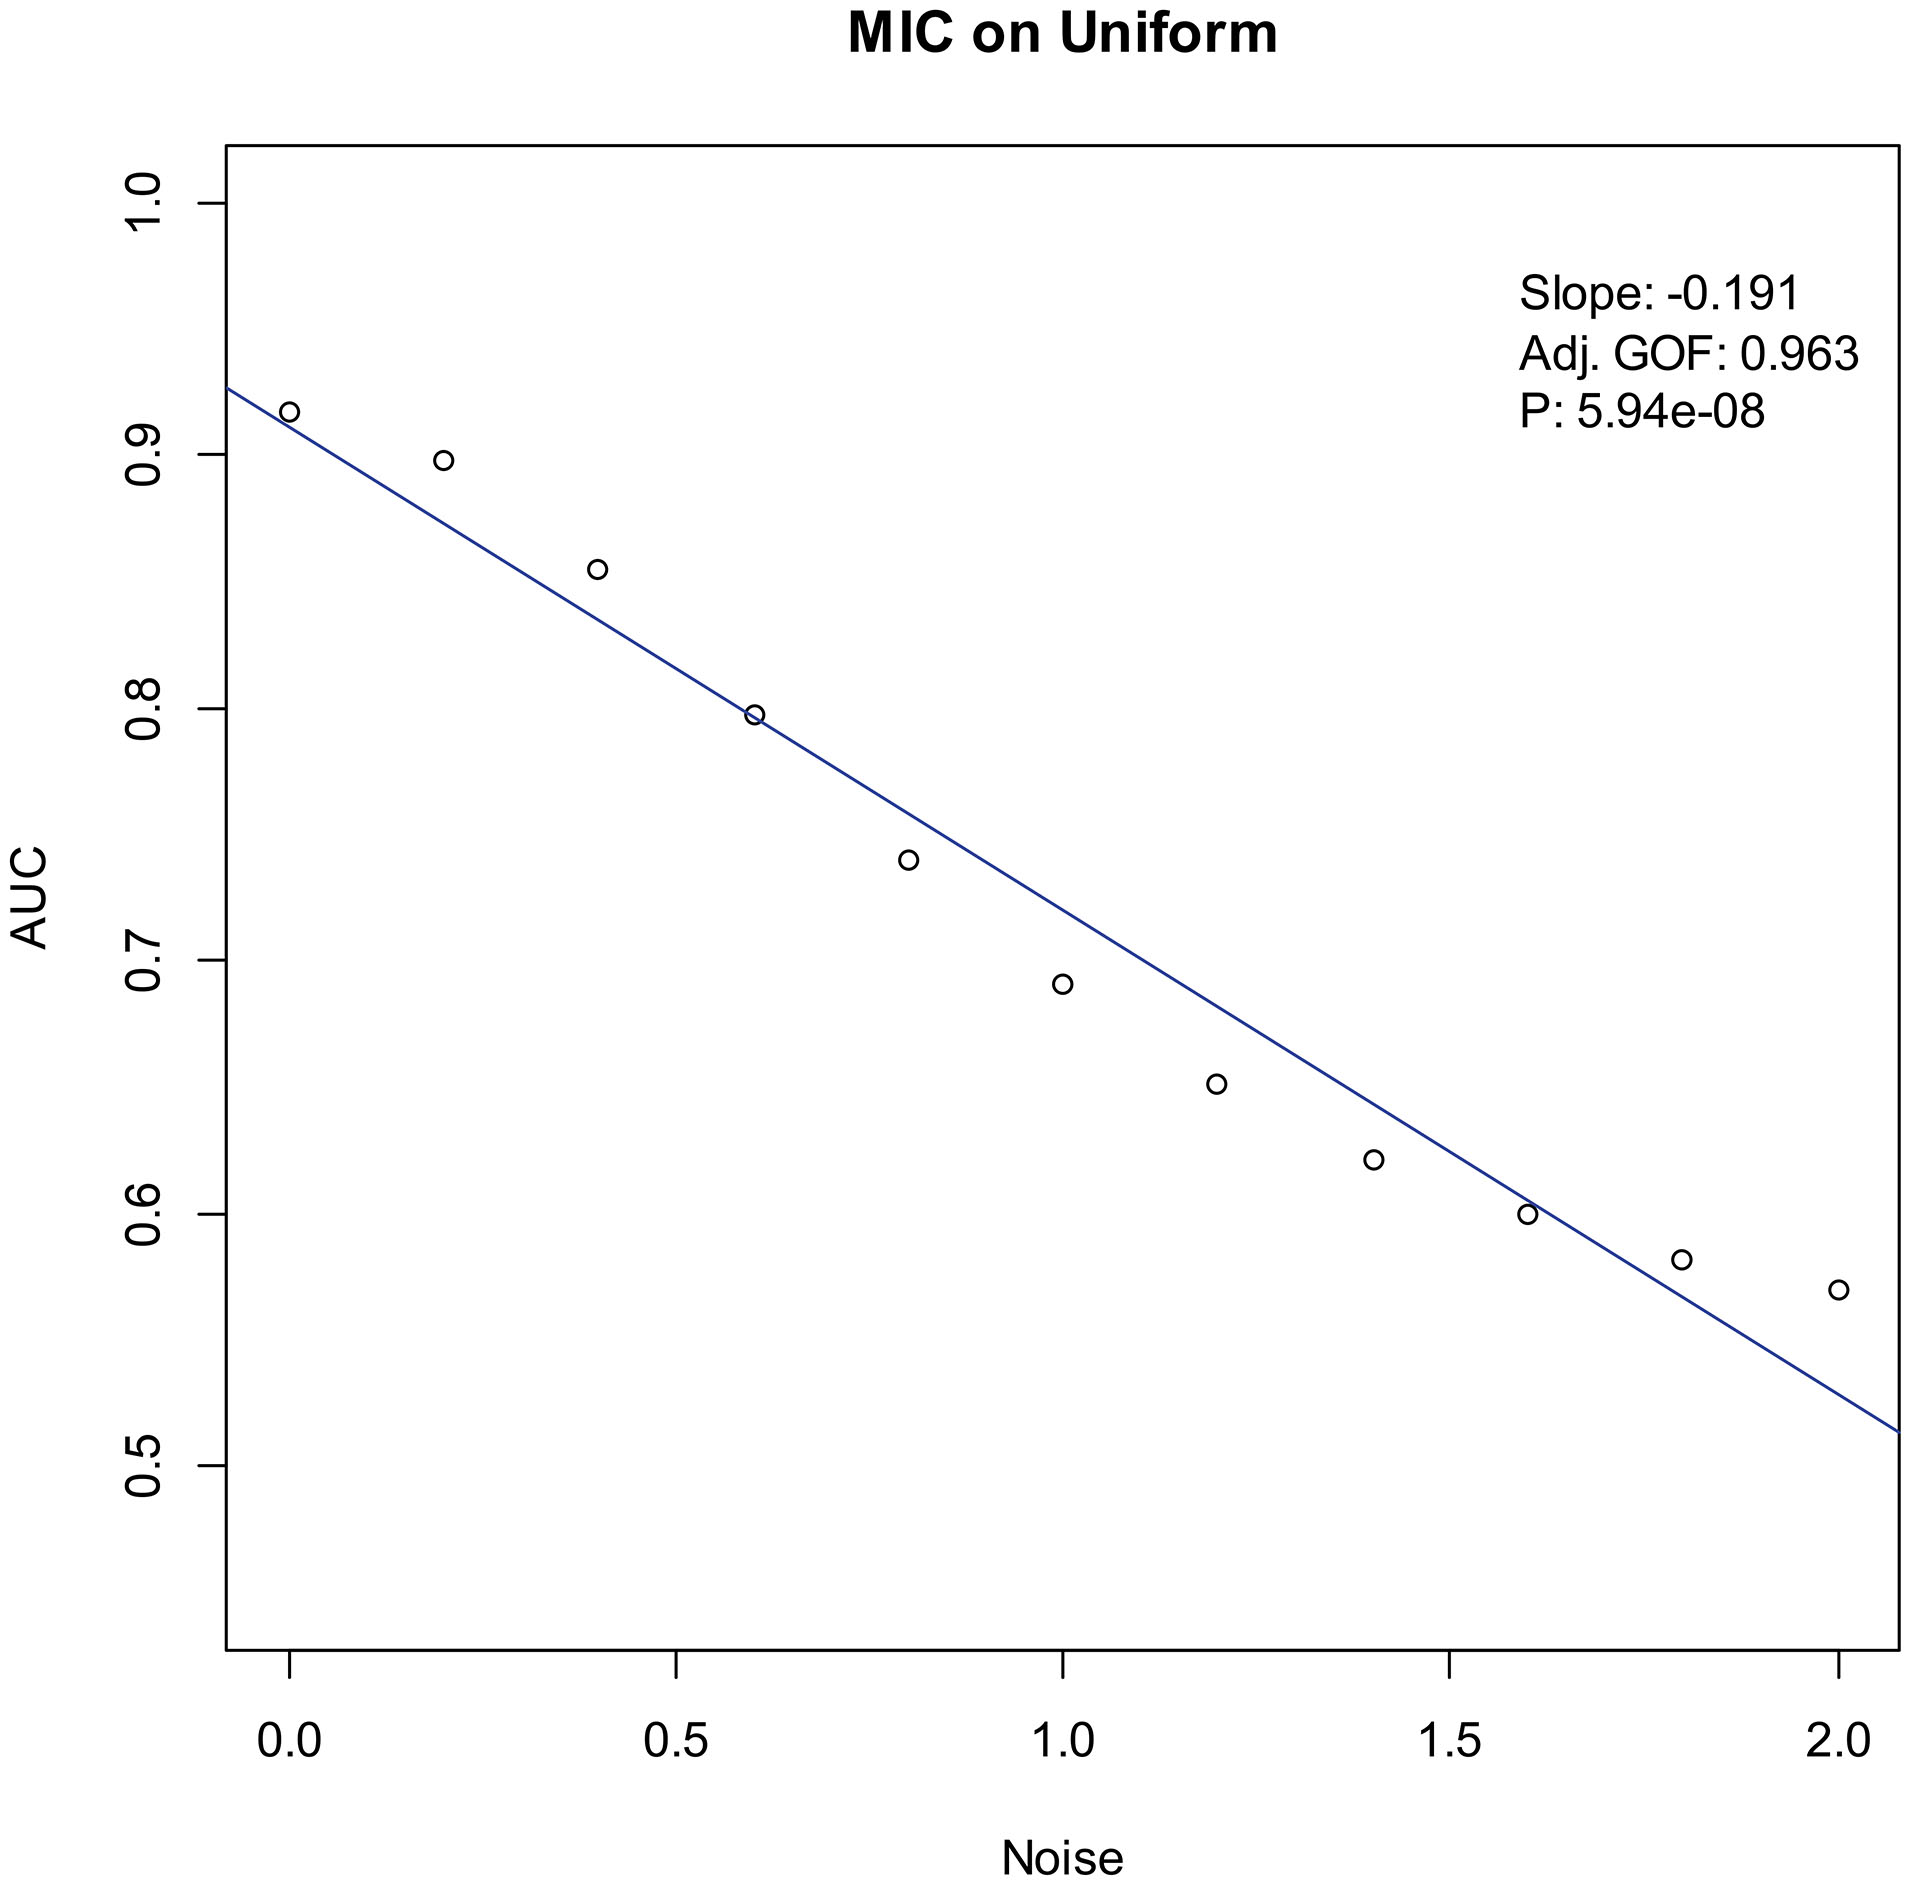 Noise-AUC plot of MIC on uniform. The line is fitted by the points. “Slope” indicates the slope of the line, “Adj. GOF” is the adjusted goodness of fit, and “P” is the P-value of the fit.